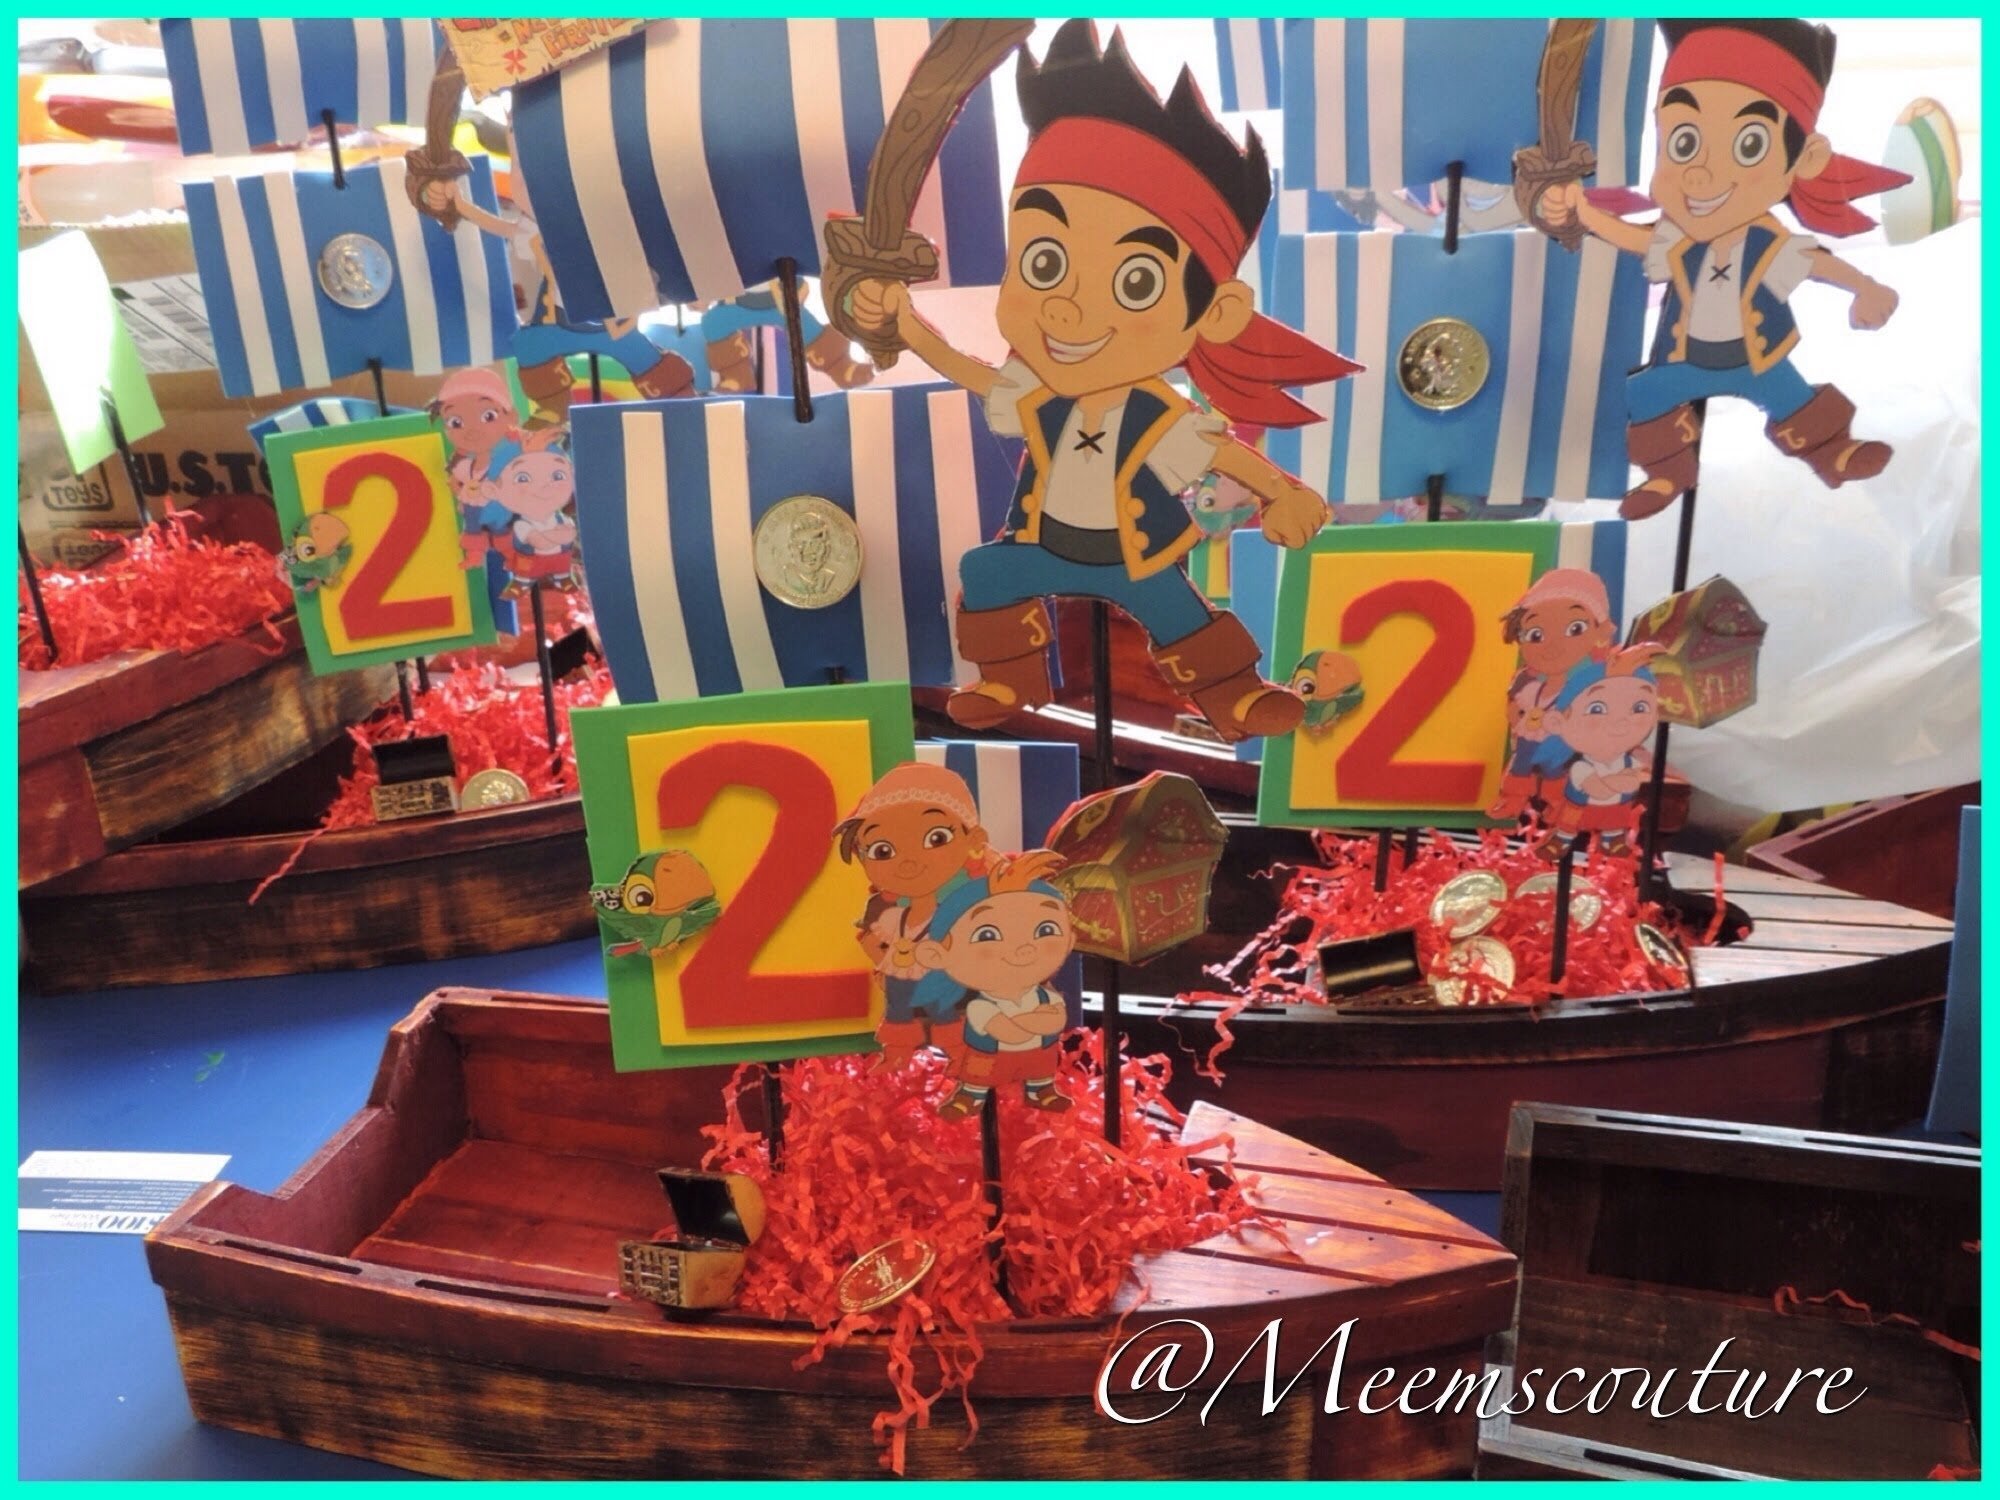 10 Lovable Jack And The Neverland Pirates Party Ideas diy jake and the neverland pirates party center pieces youtube 3 2022